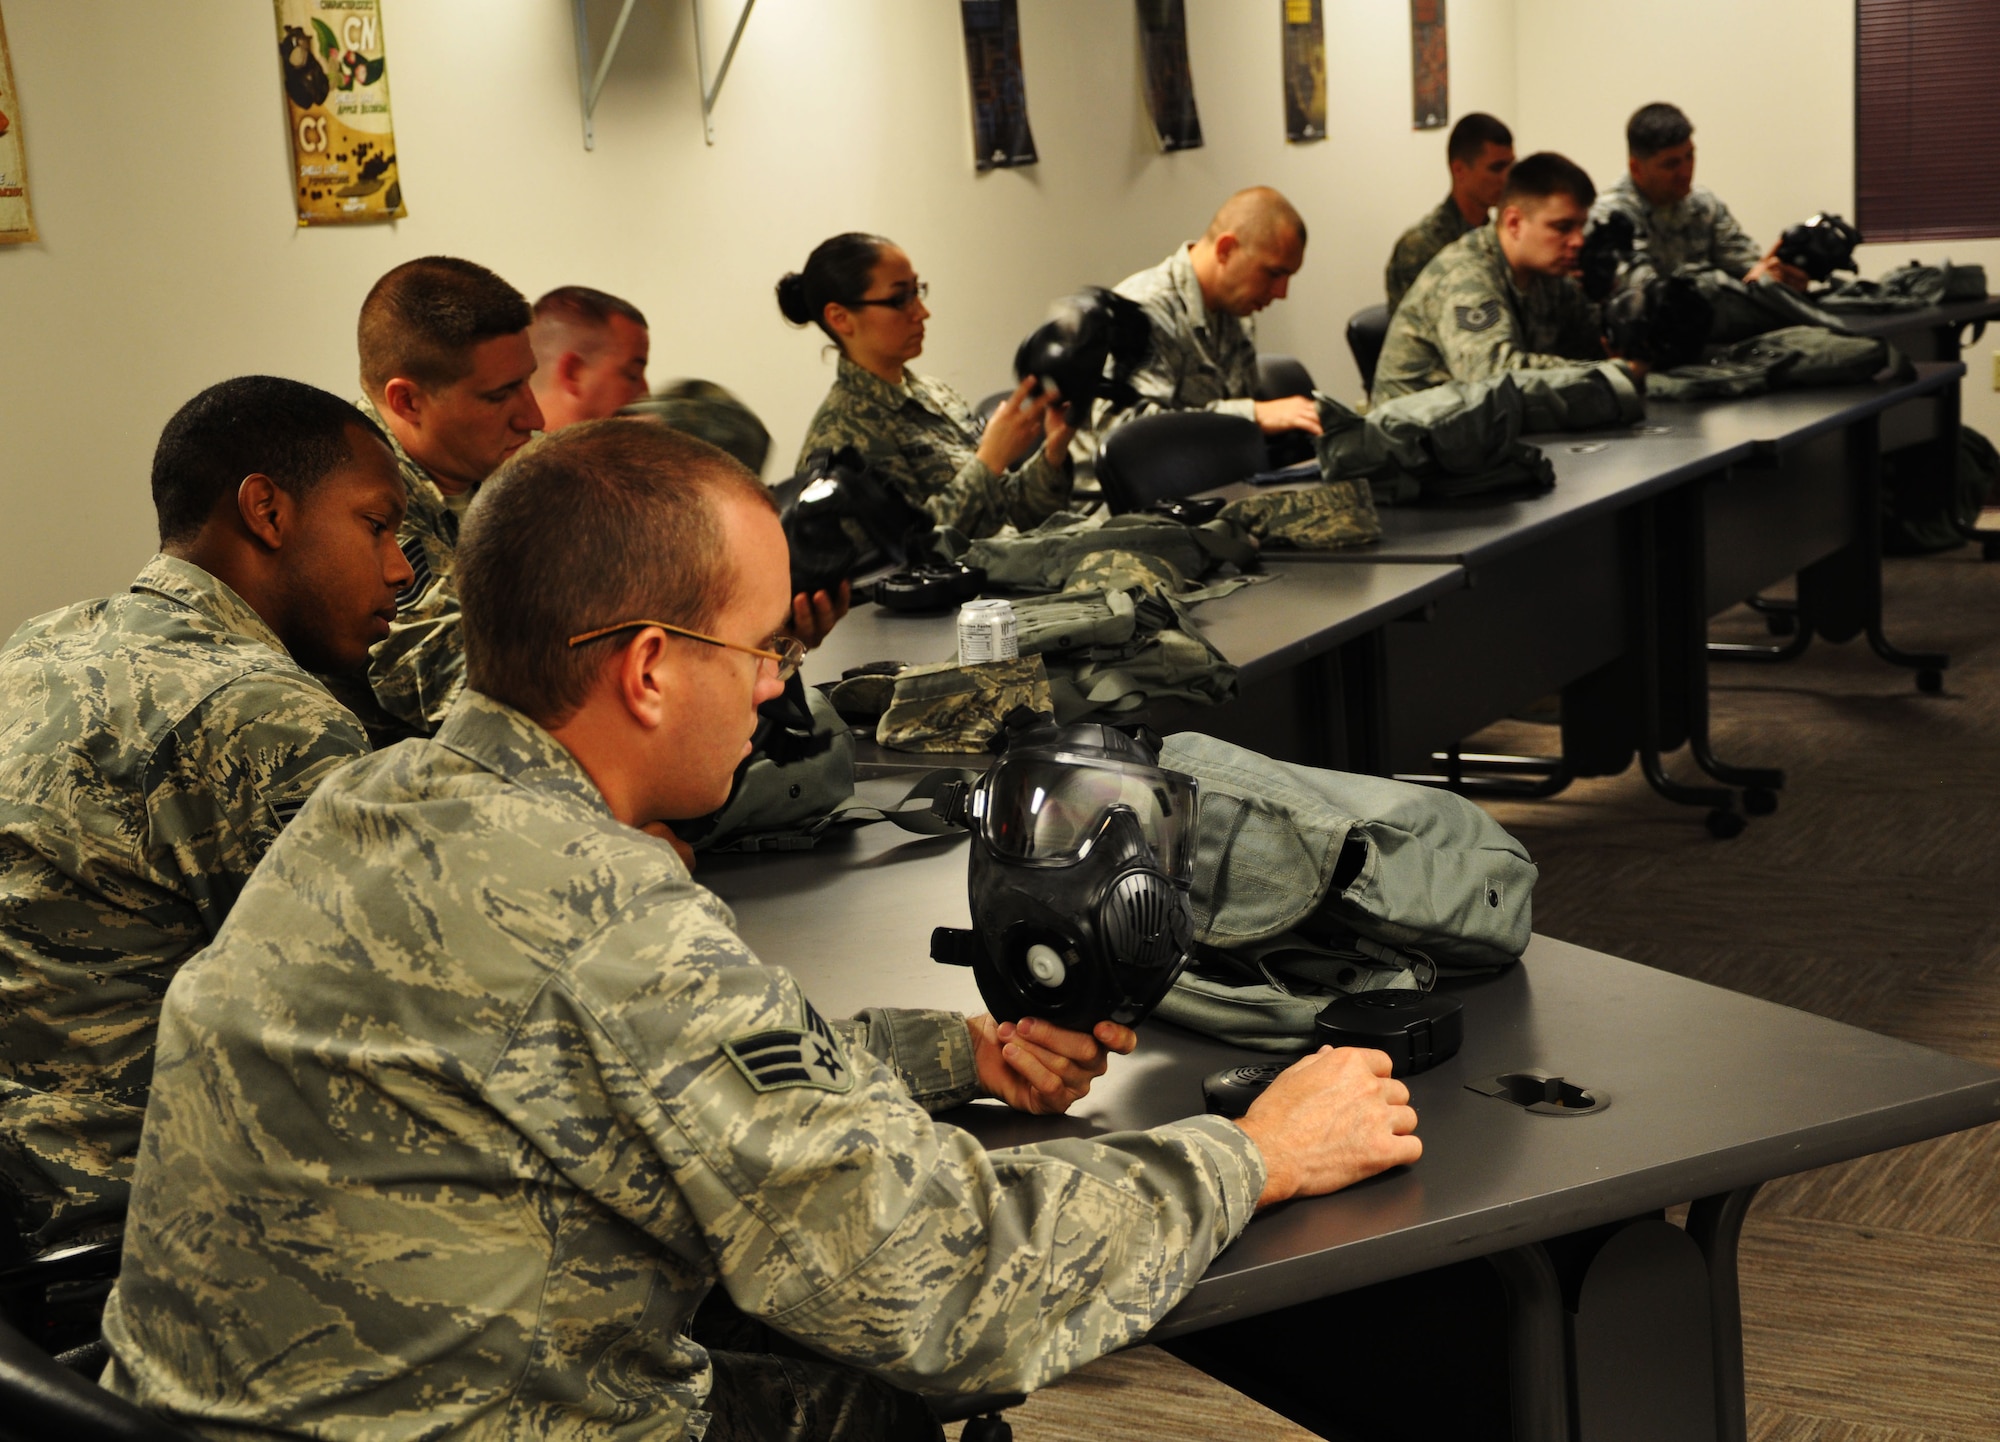 Members of the 931st Air Refueling Group inspect their gas masks for any holes or tears during a Chemical, Biological, Radiological, Nuclear and Explosive (CBRNE) training April 12, 2015, McConnell Air Force Base, The class ensures Airmen can work and survive in a chemical environment and that they are also prepared to handle any hazardous materials. (U.S. Air Force photo by Tech. Sgt. Abigail Klein)